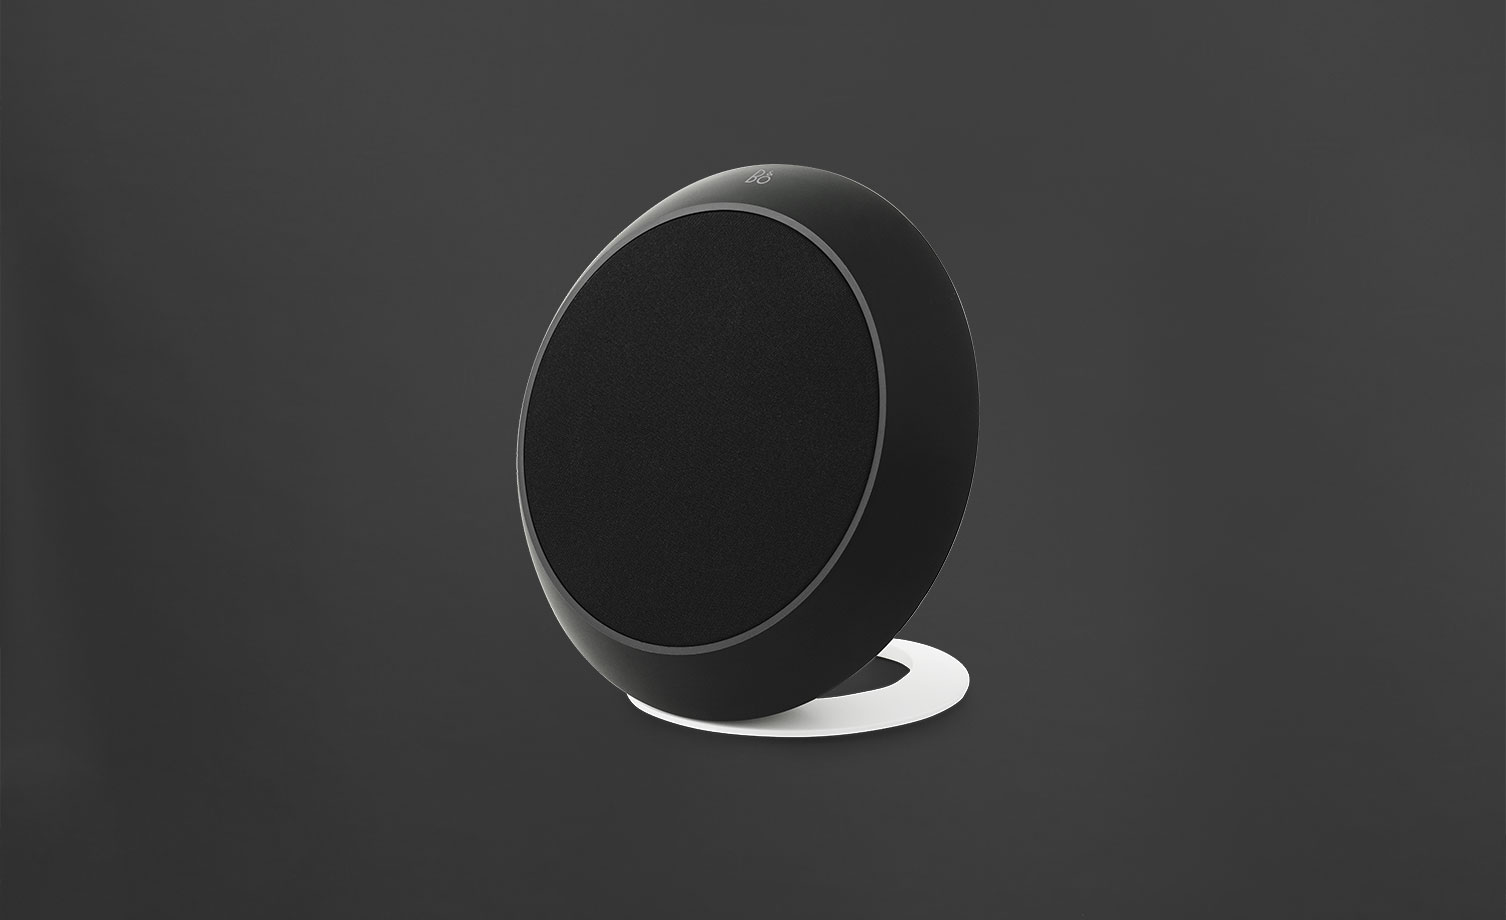 bang-olufsen-beoplay-s8-entry-level-wireless-speakers-priced-under-17005